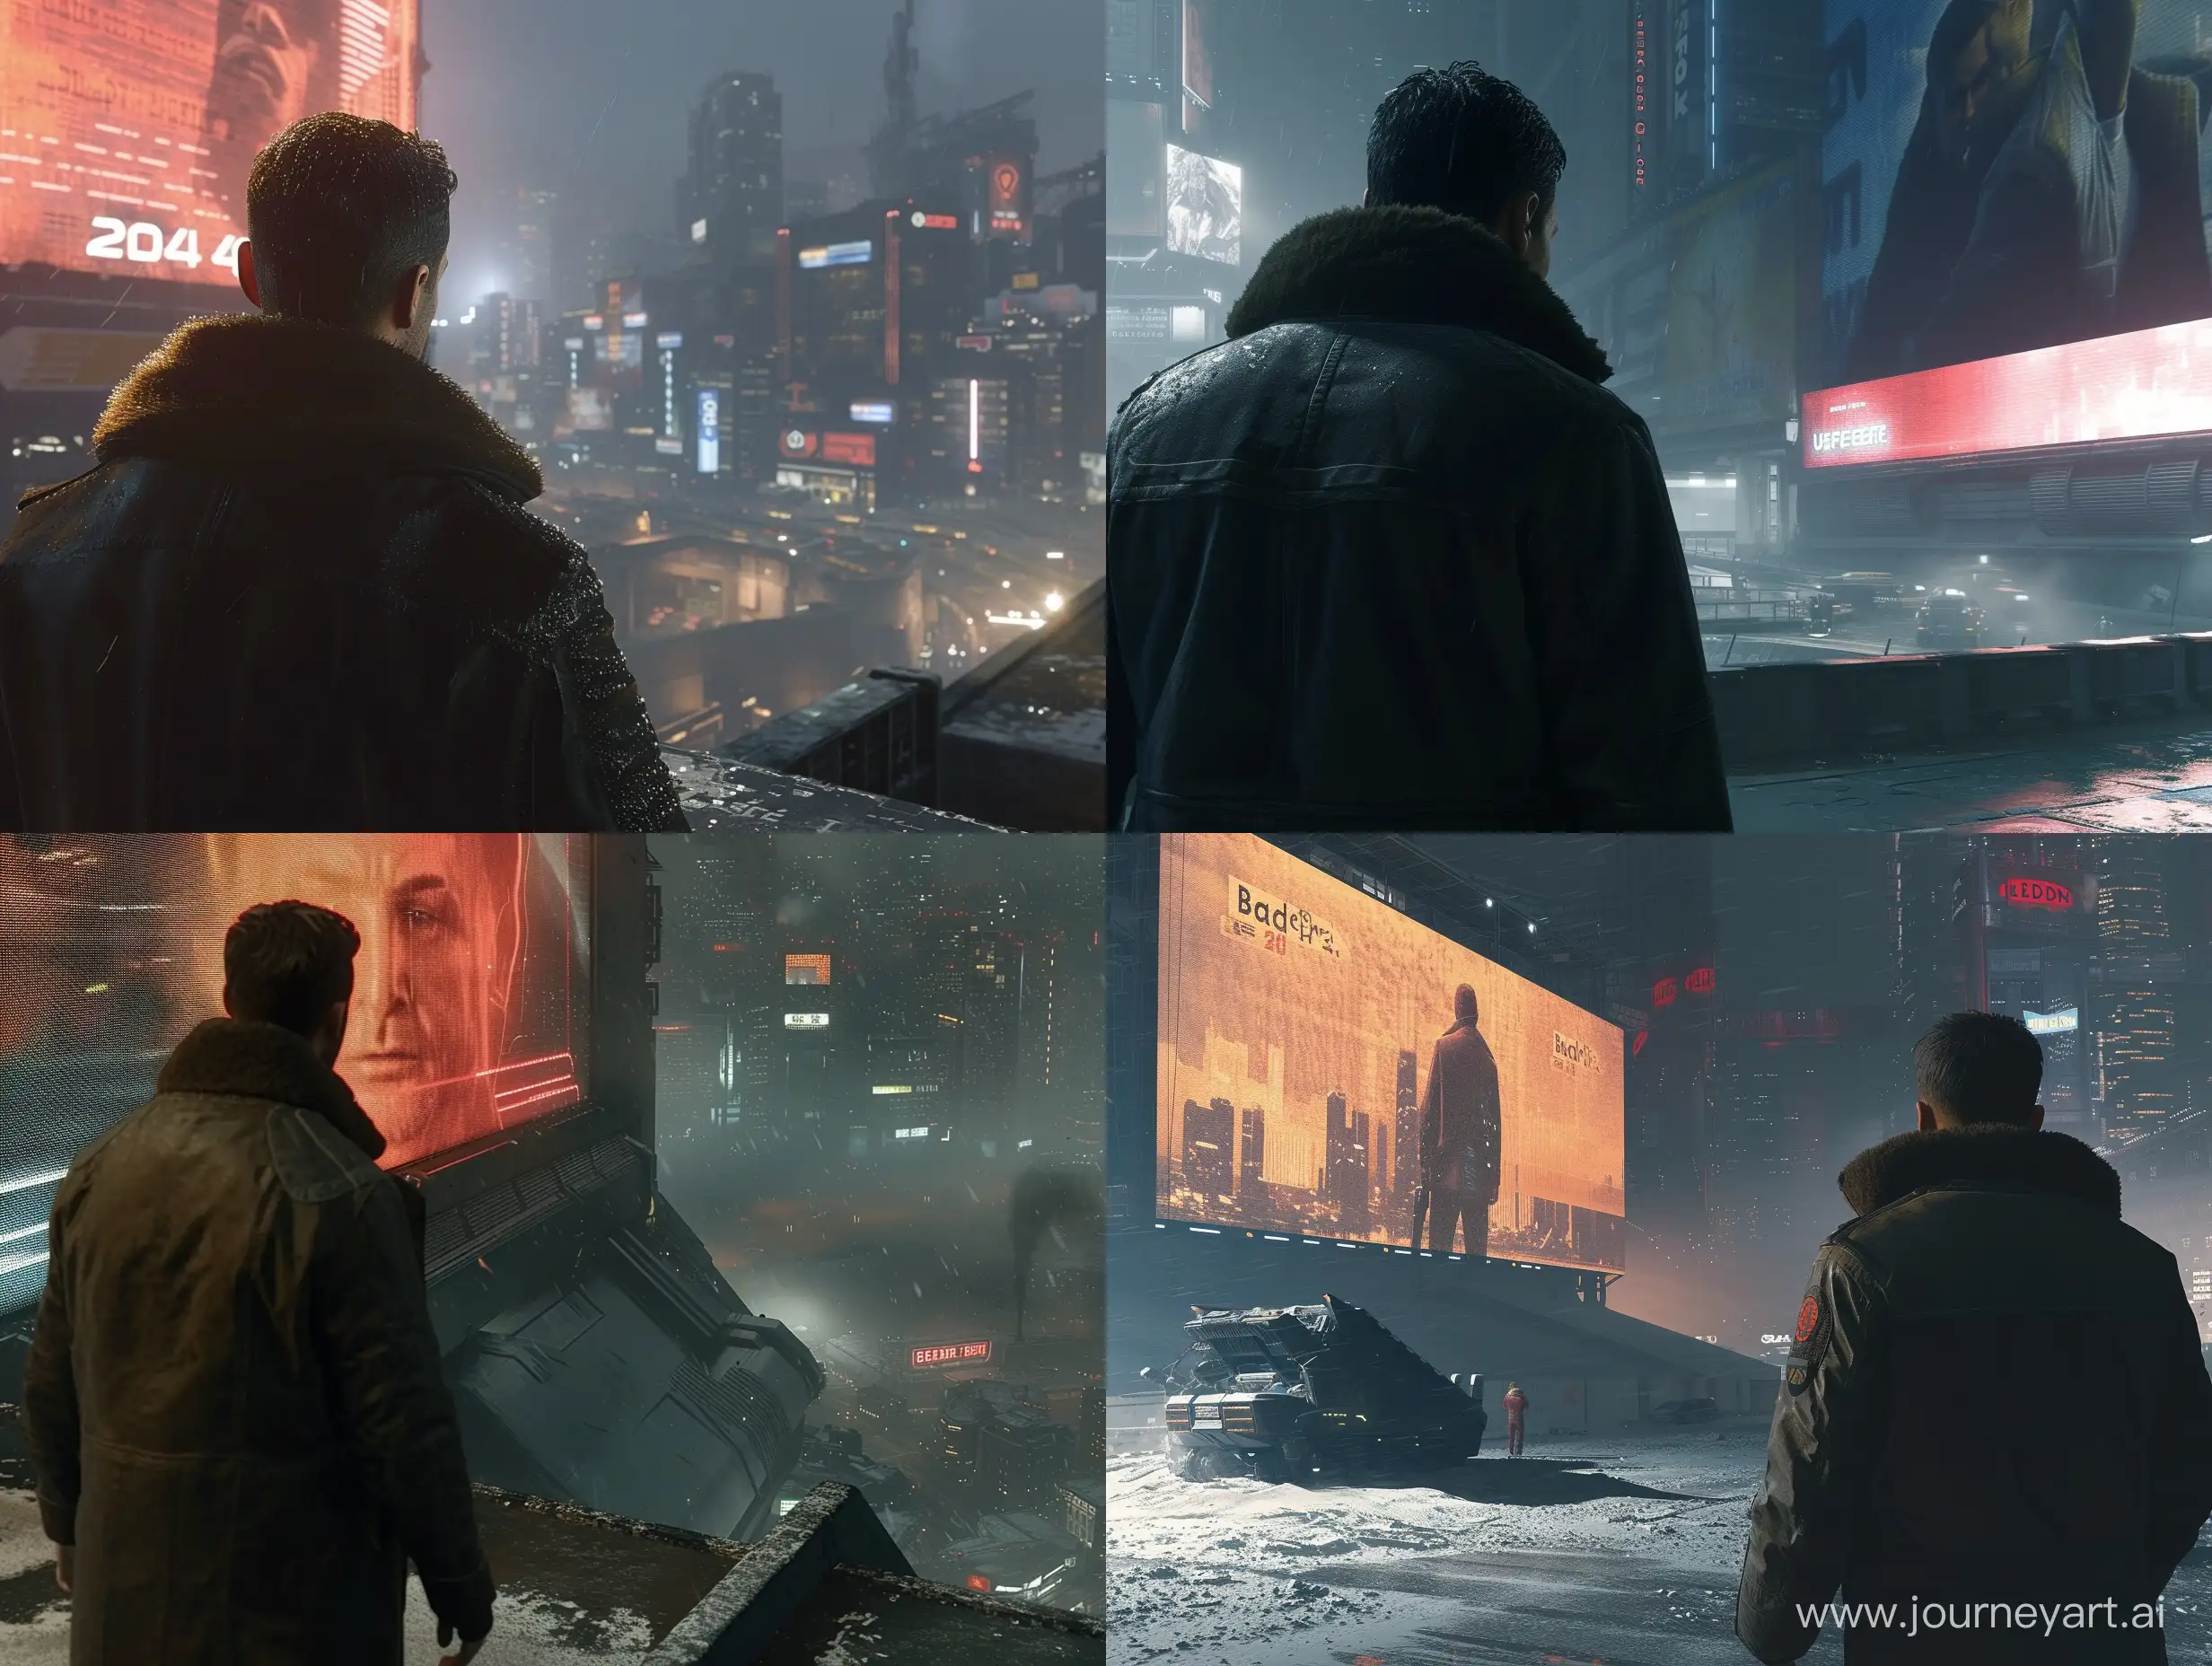 "Blade Runner 2049" is a third-person video game taking place in a futuristic city with cutting-edge ray tracing graphics. Tailored for the PS5, this edition showcases the protagonist, played by Ryan Gosling, from behind as he navigates through a area an looks at a giant billboard, offering an expansive open-world experience driven by the Unreal Engine, all within a nighttime setting.